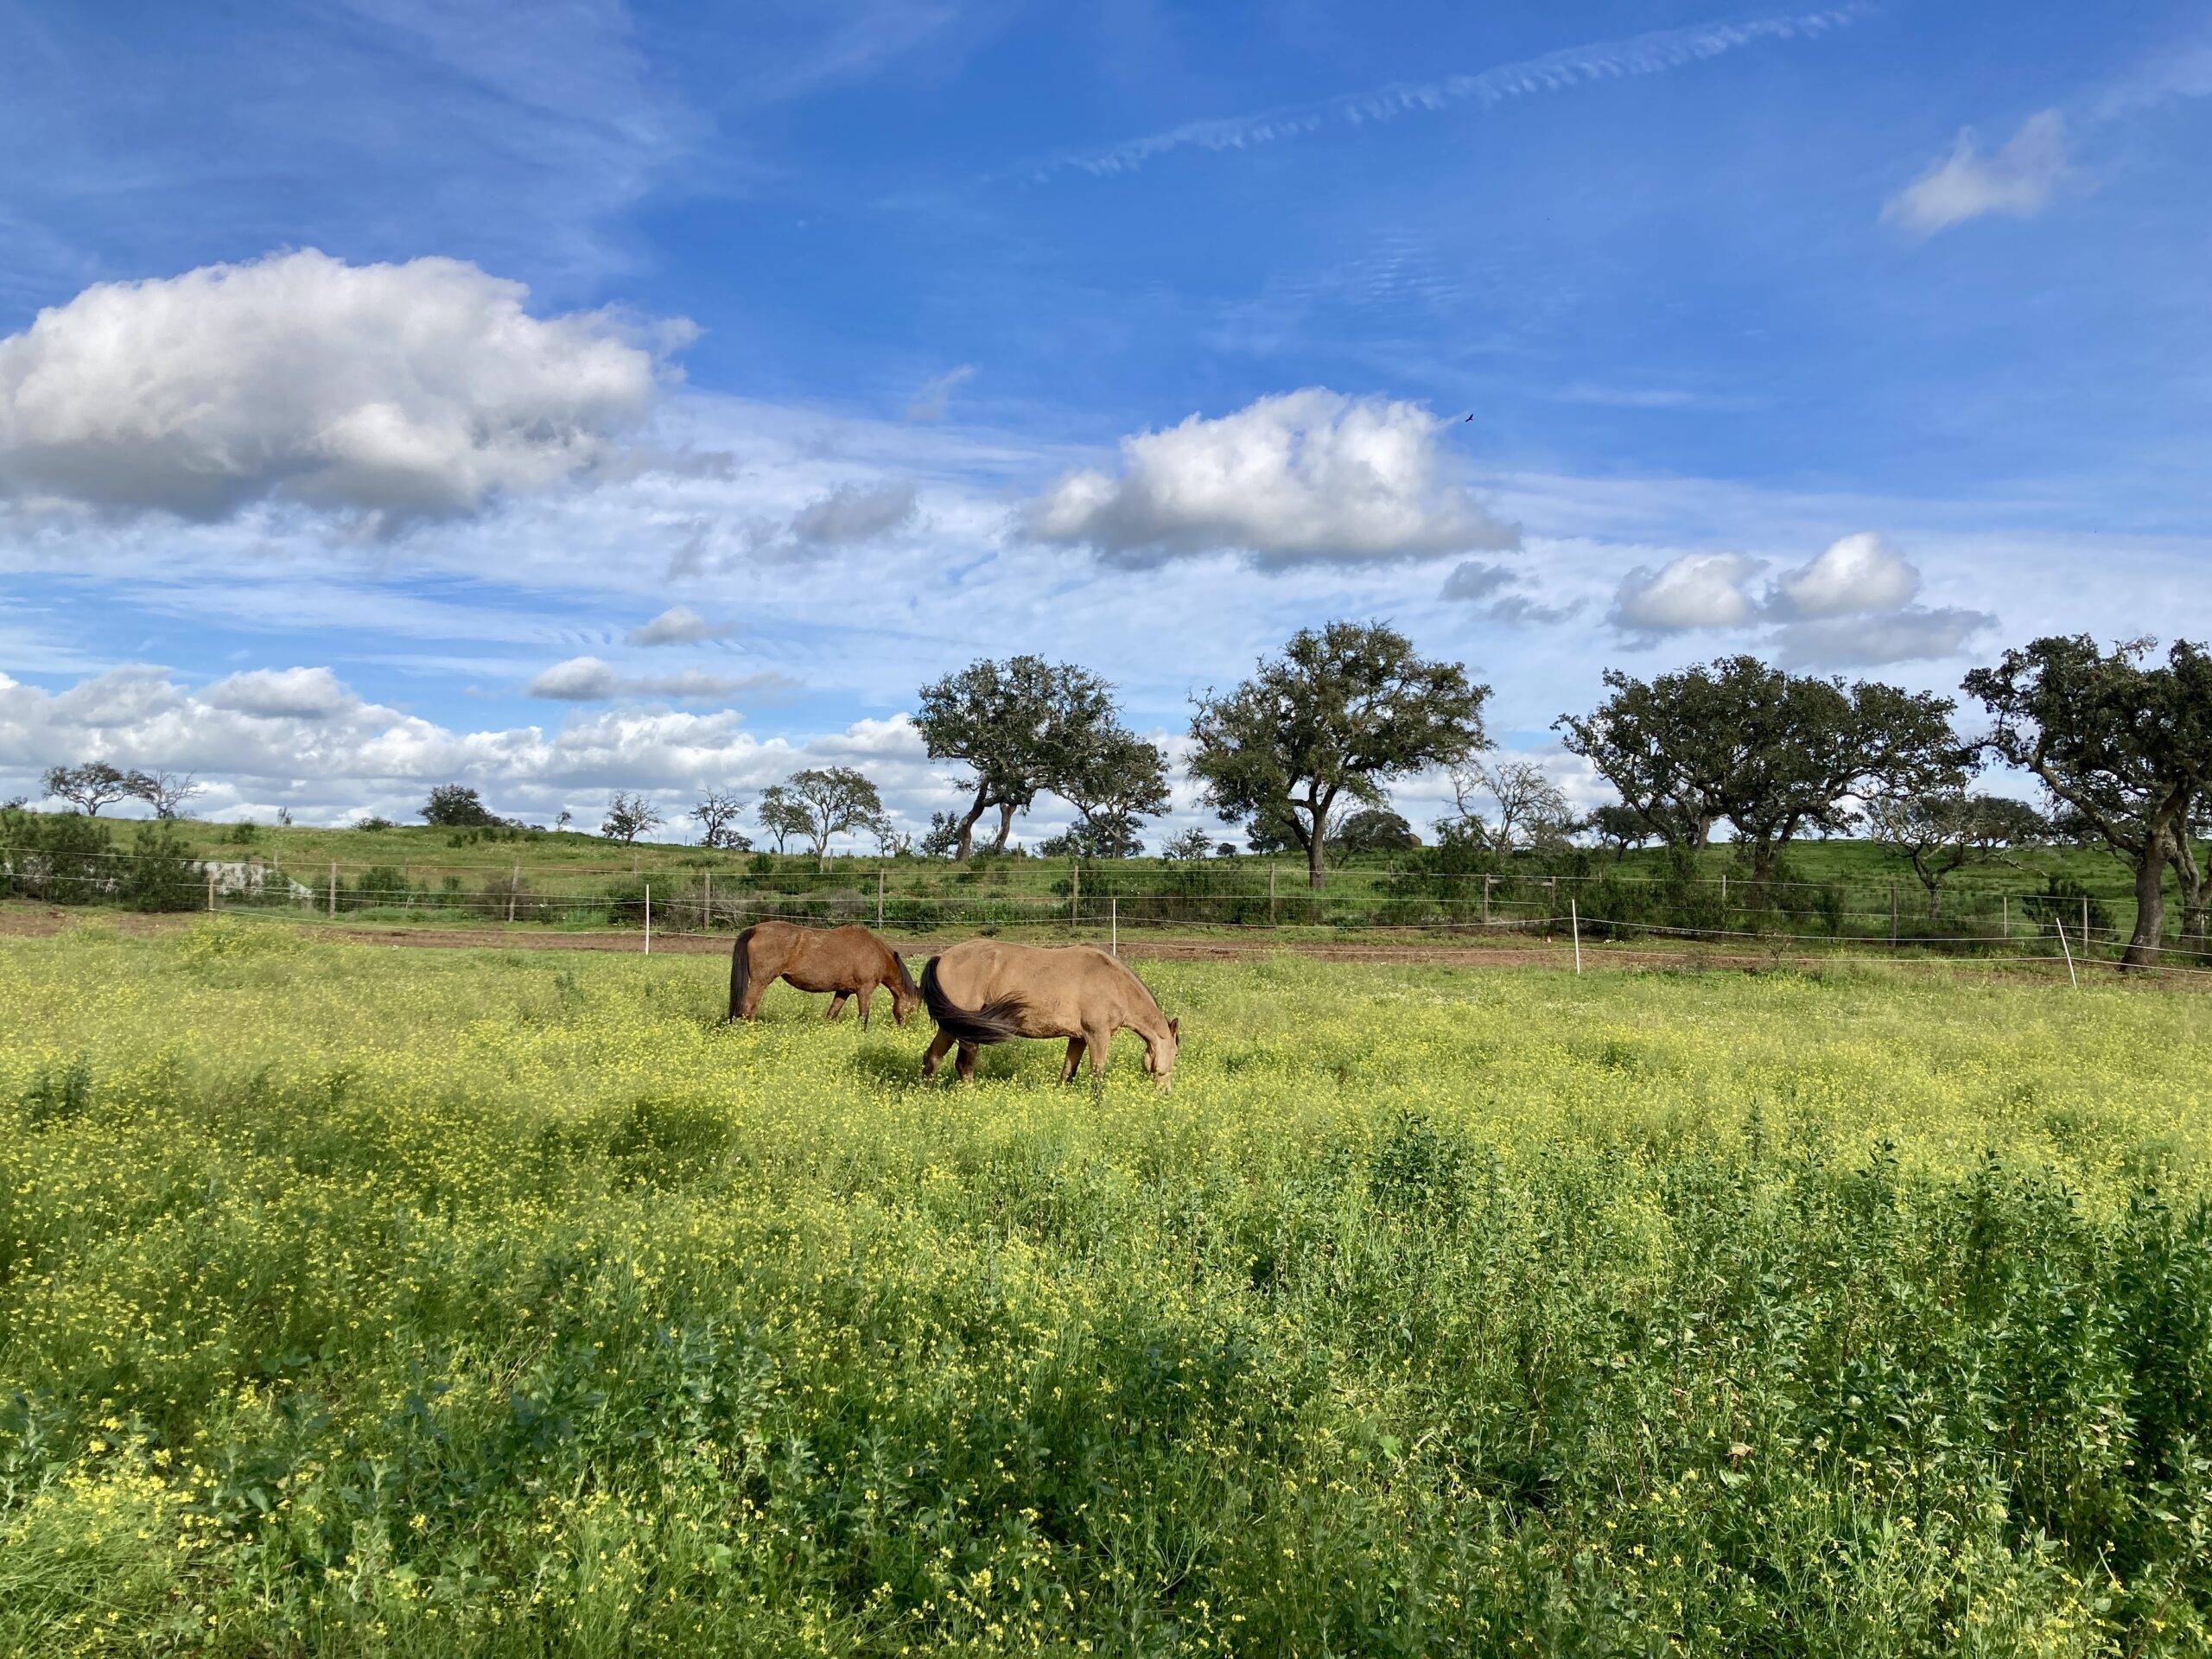 Two brown horses in a grassy pasture at Equus Ourique